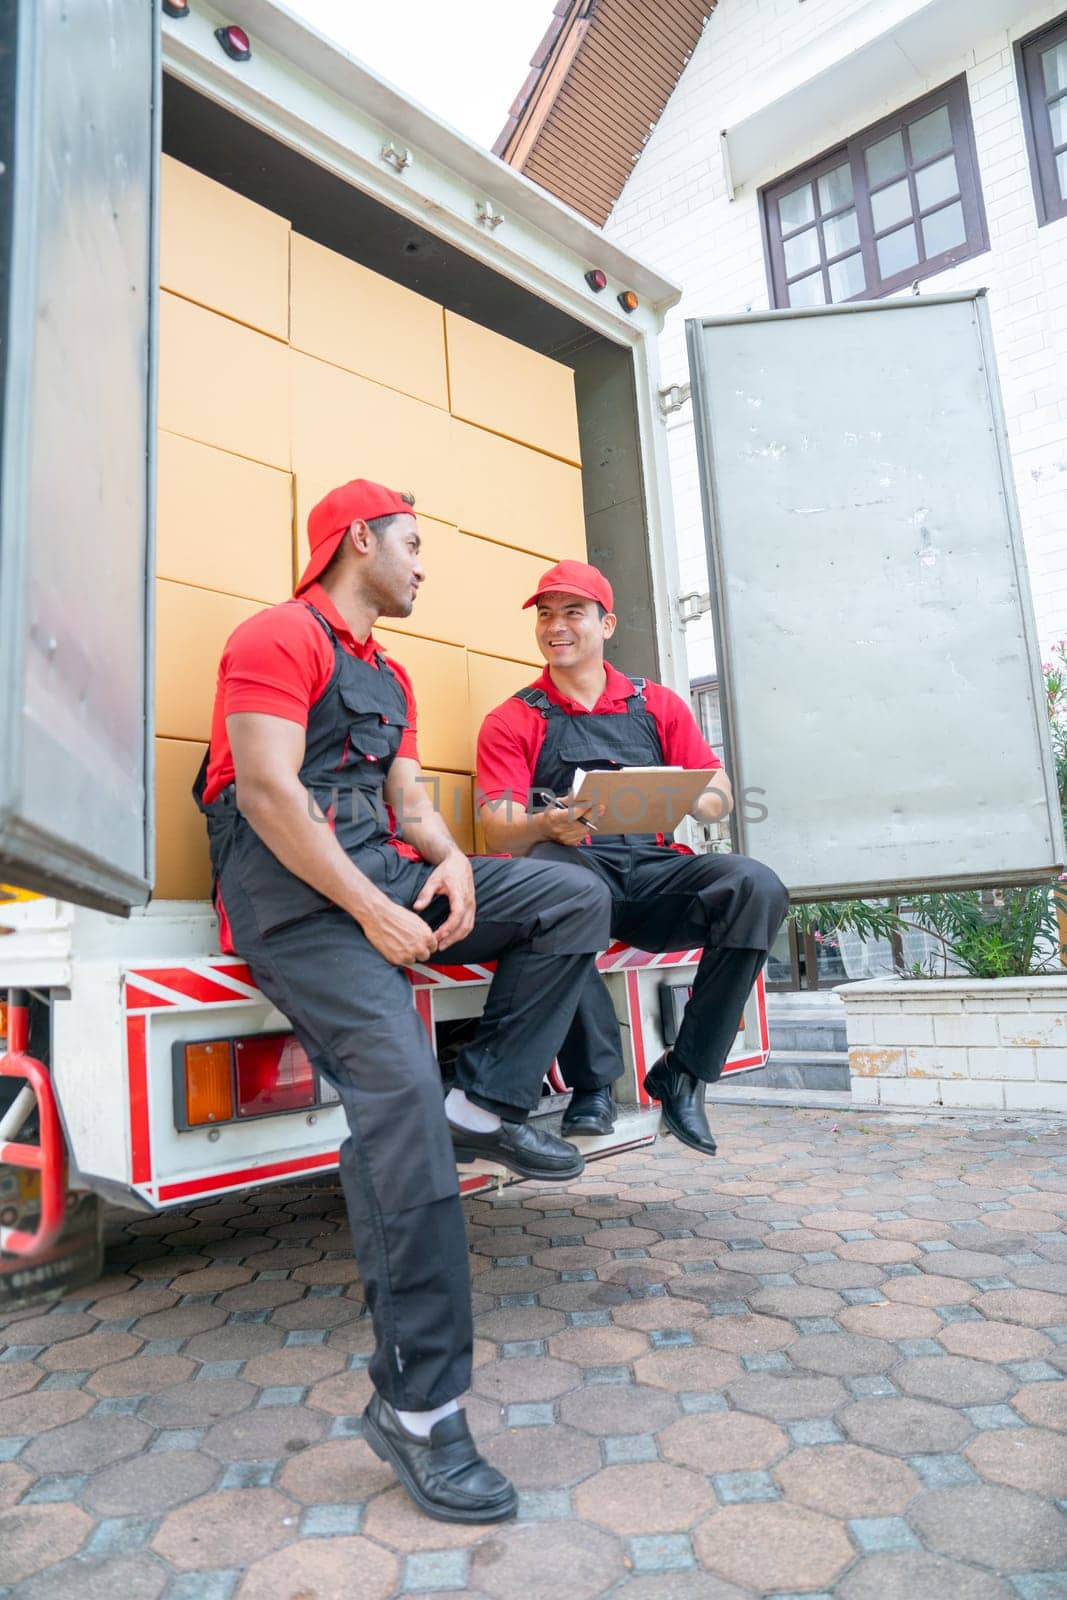 Vertical image of two delivery men sit and discuss together on back part of truck during move package or boxes to customer house.